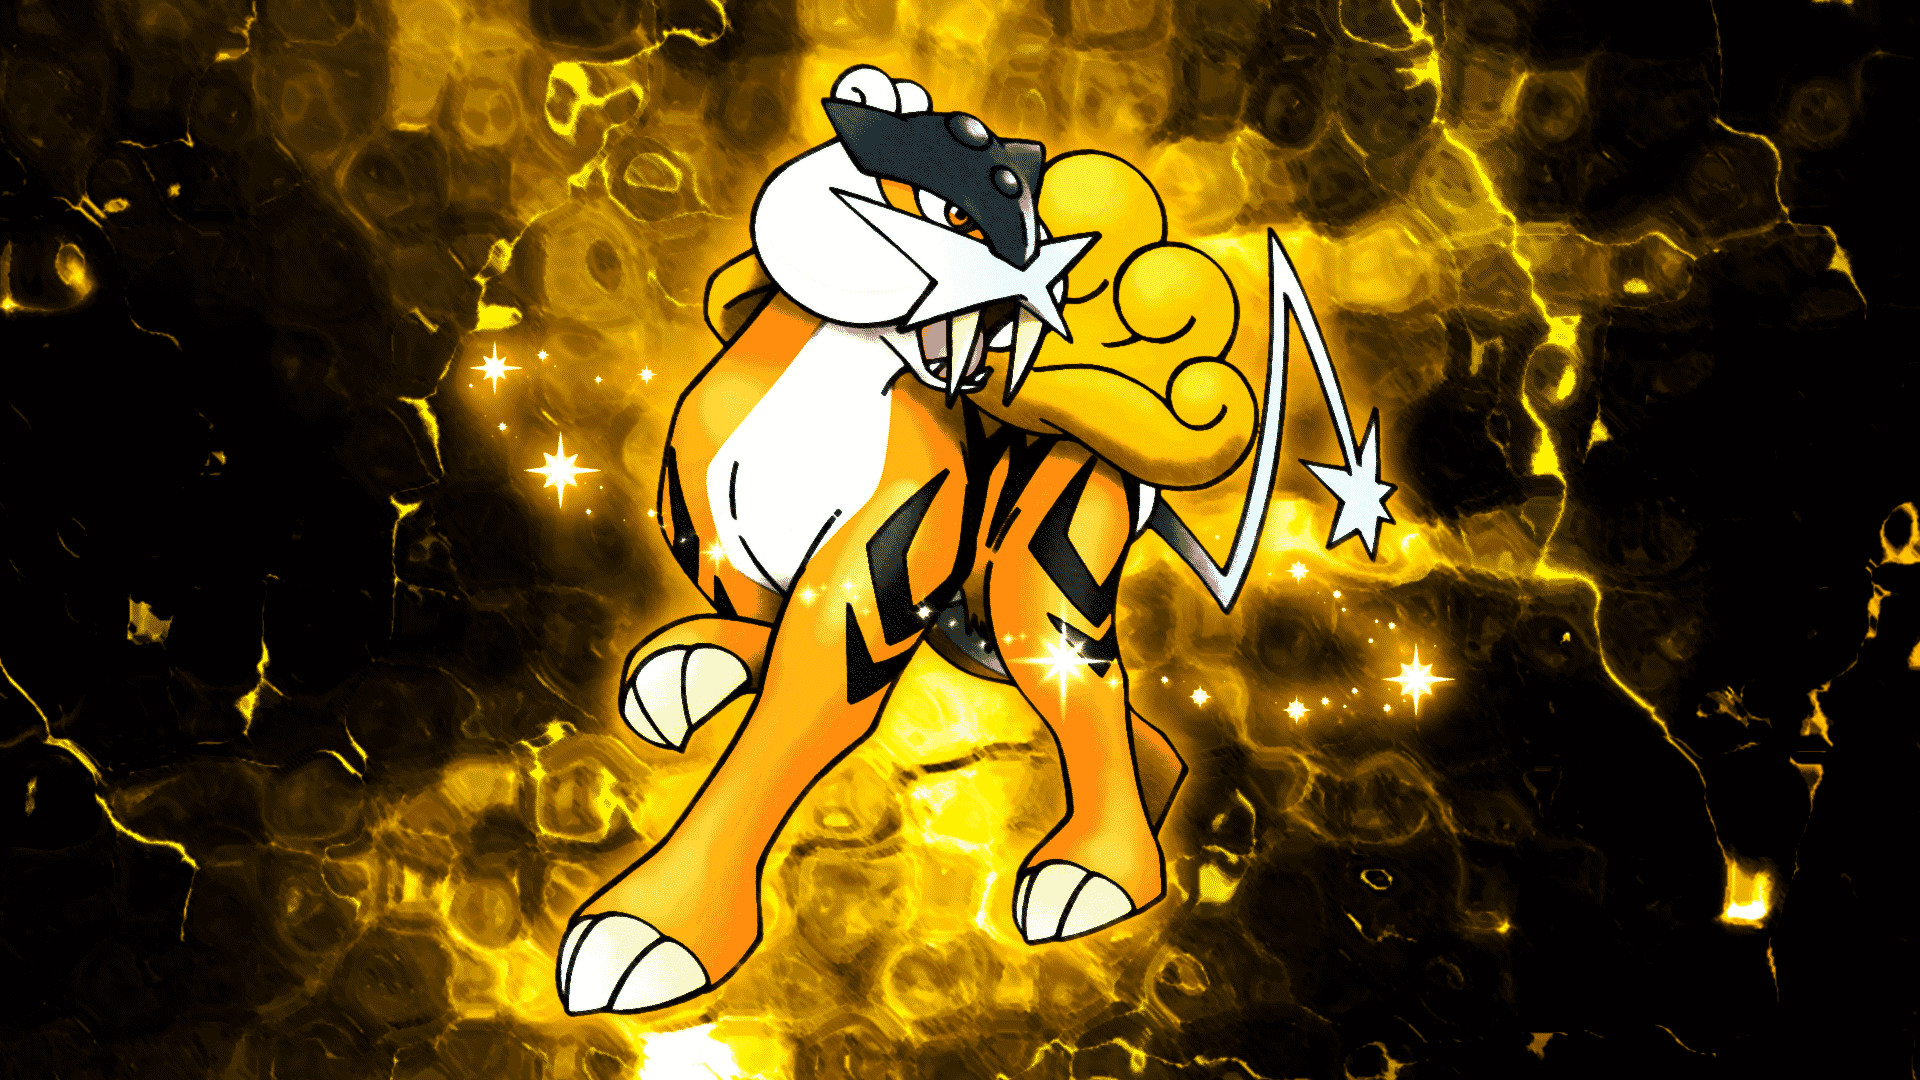 1920x1080 Raikou as we know is one the three legendary dog PokÃ©mon, who came back  after a the legendary birds were gone. Raikou is an electric type PokÃ©mon  that is ...